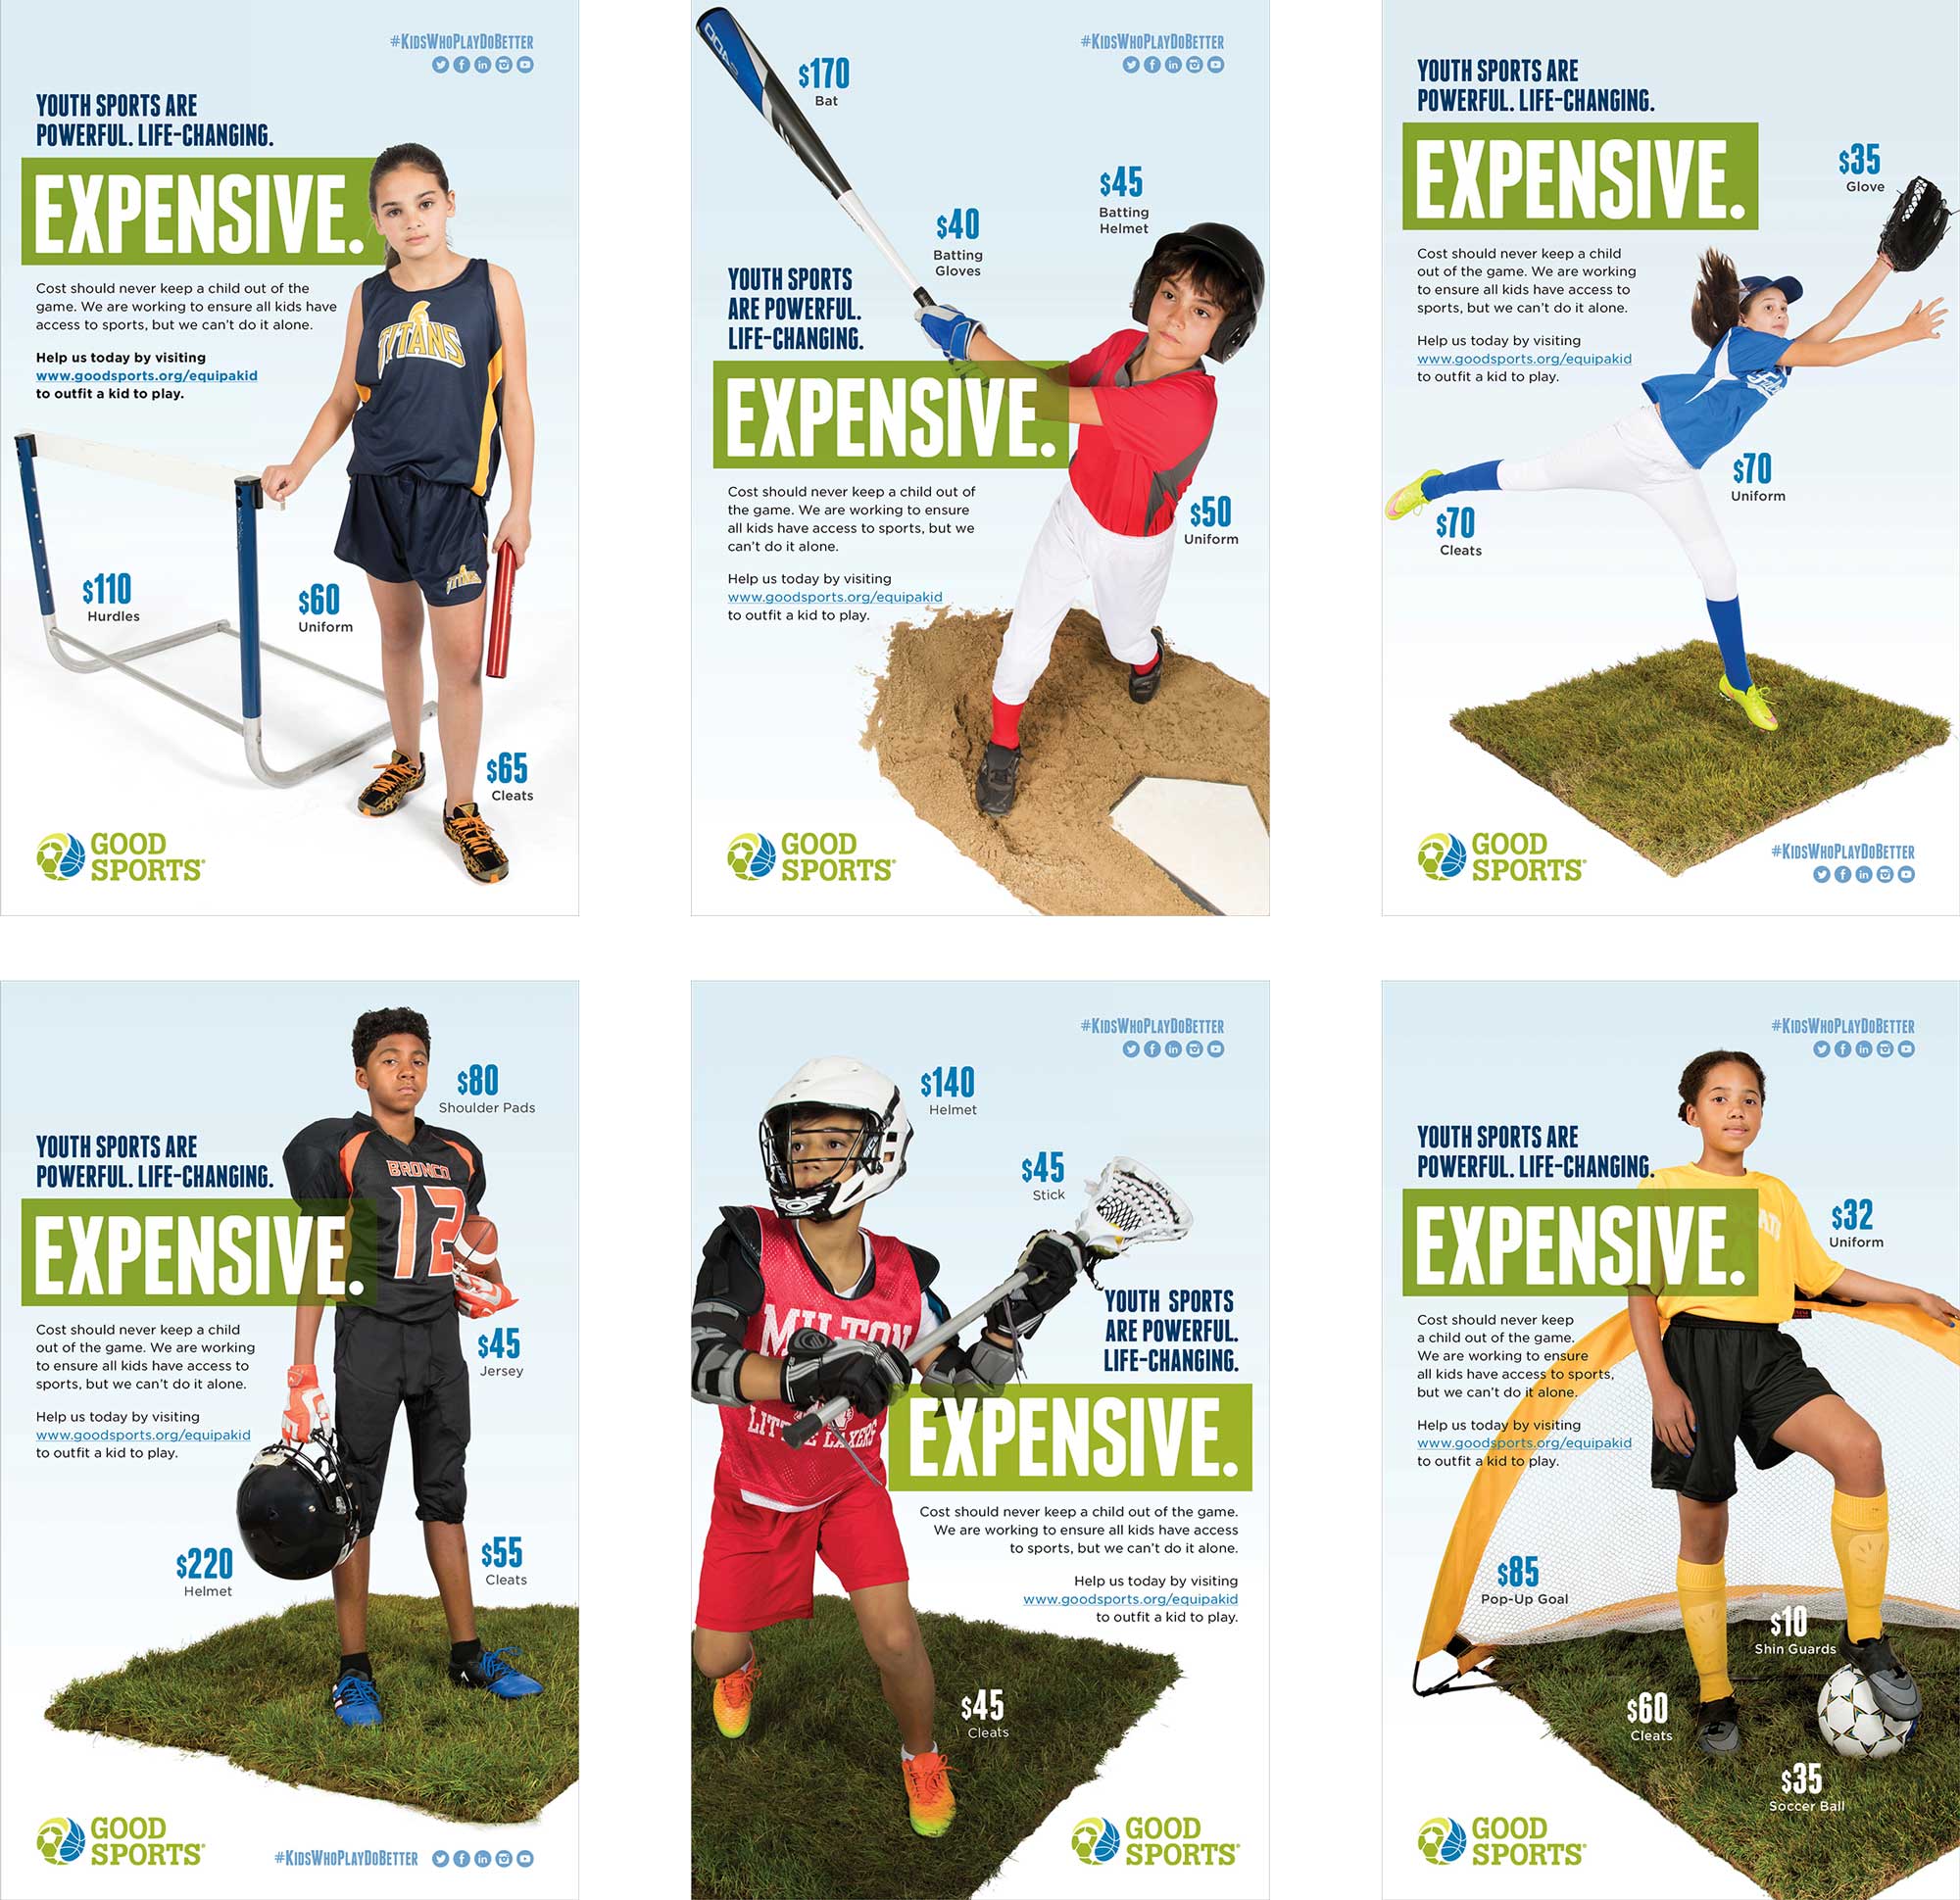 Good Sports advertising campaign showing kids playing sports with prices on equipment